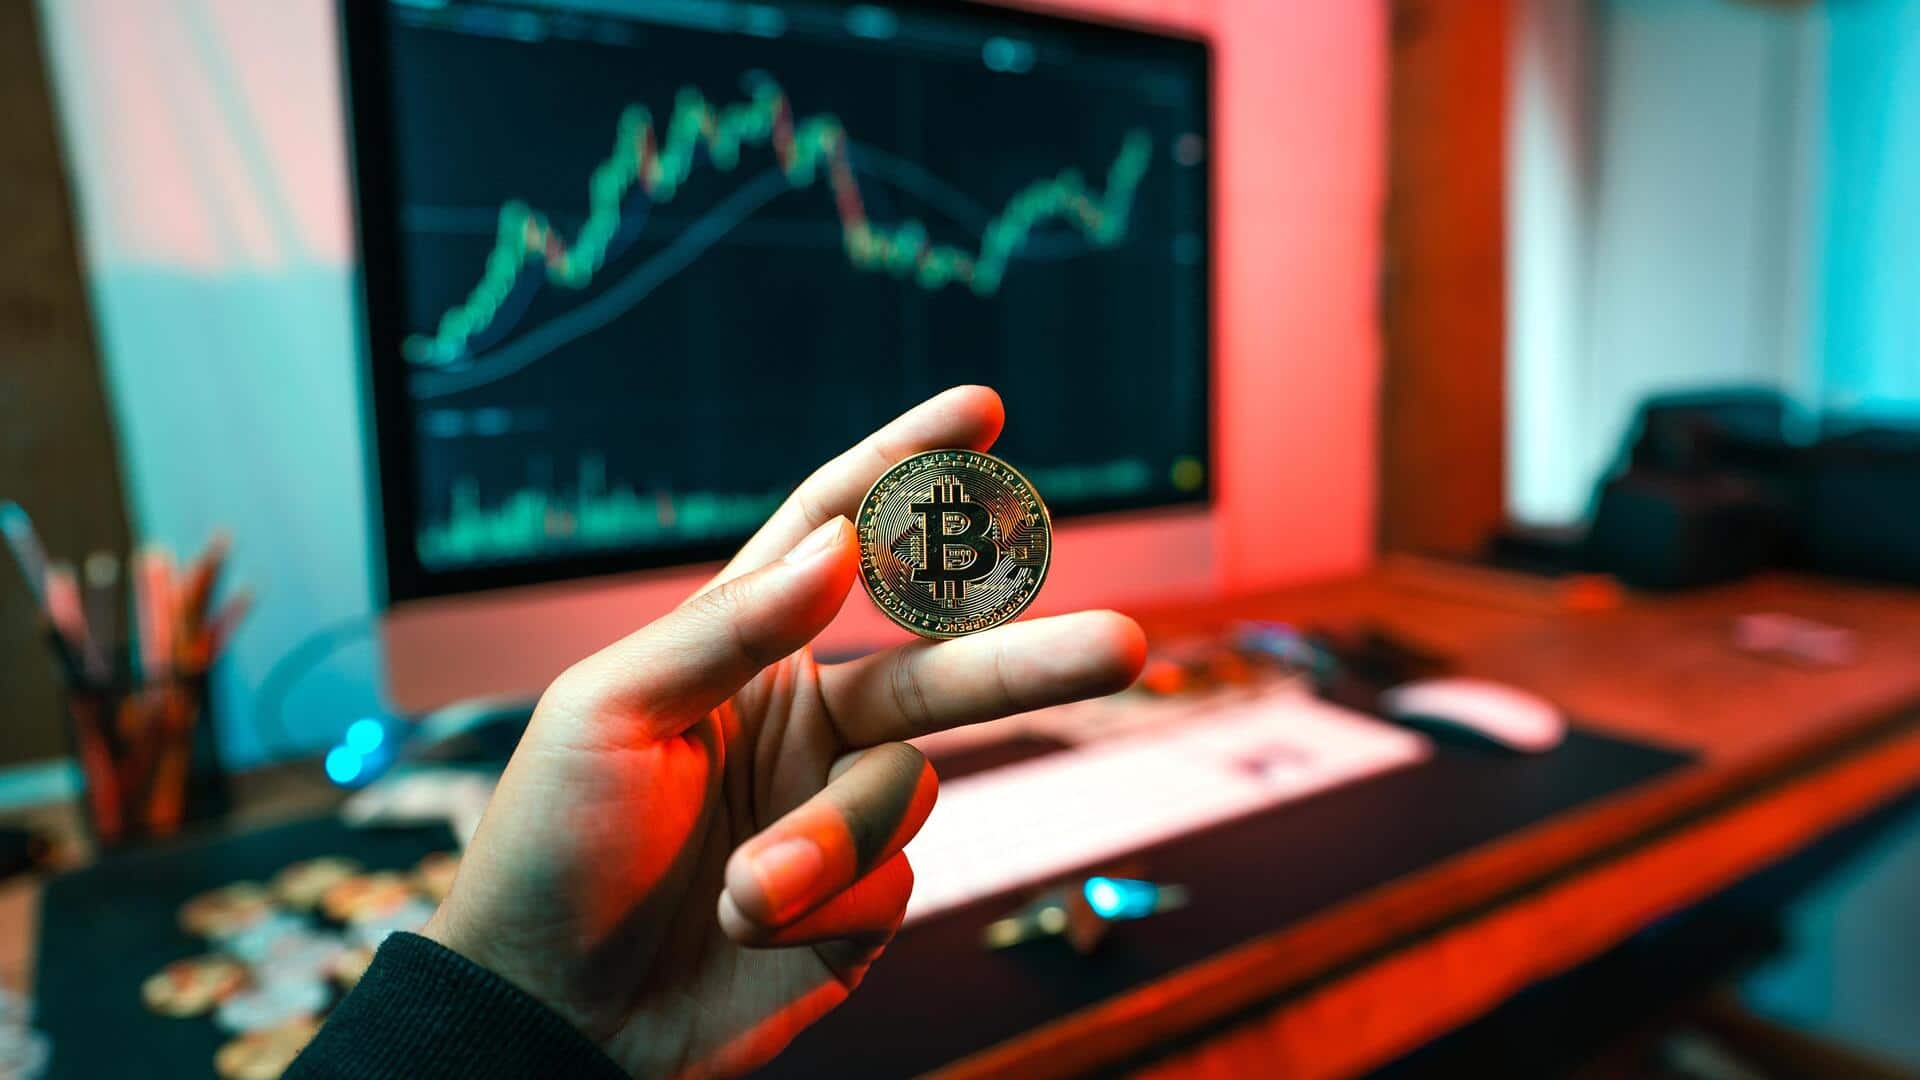 Bitcoin tanks 8% to reach 2-month low